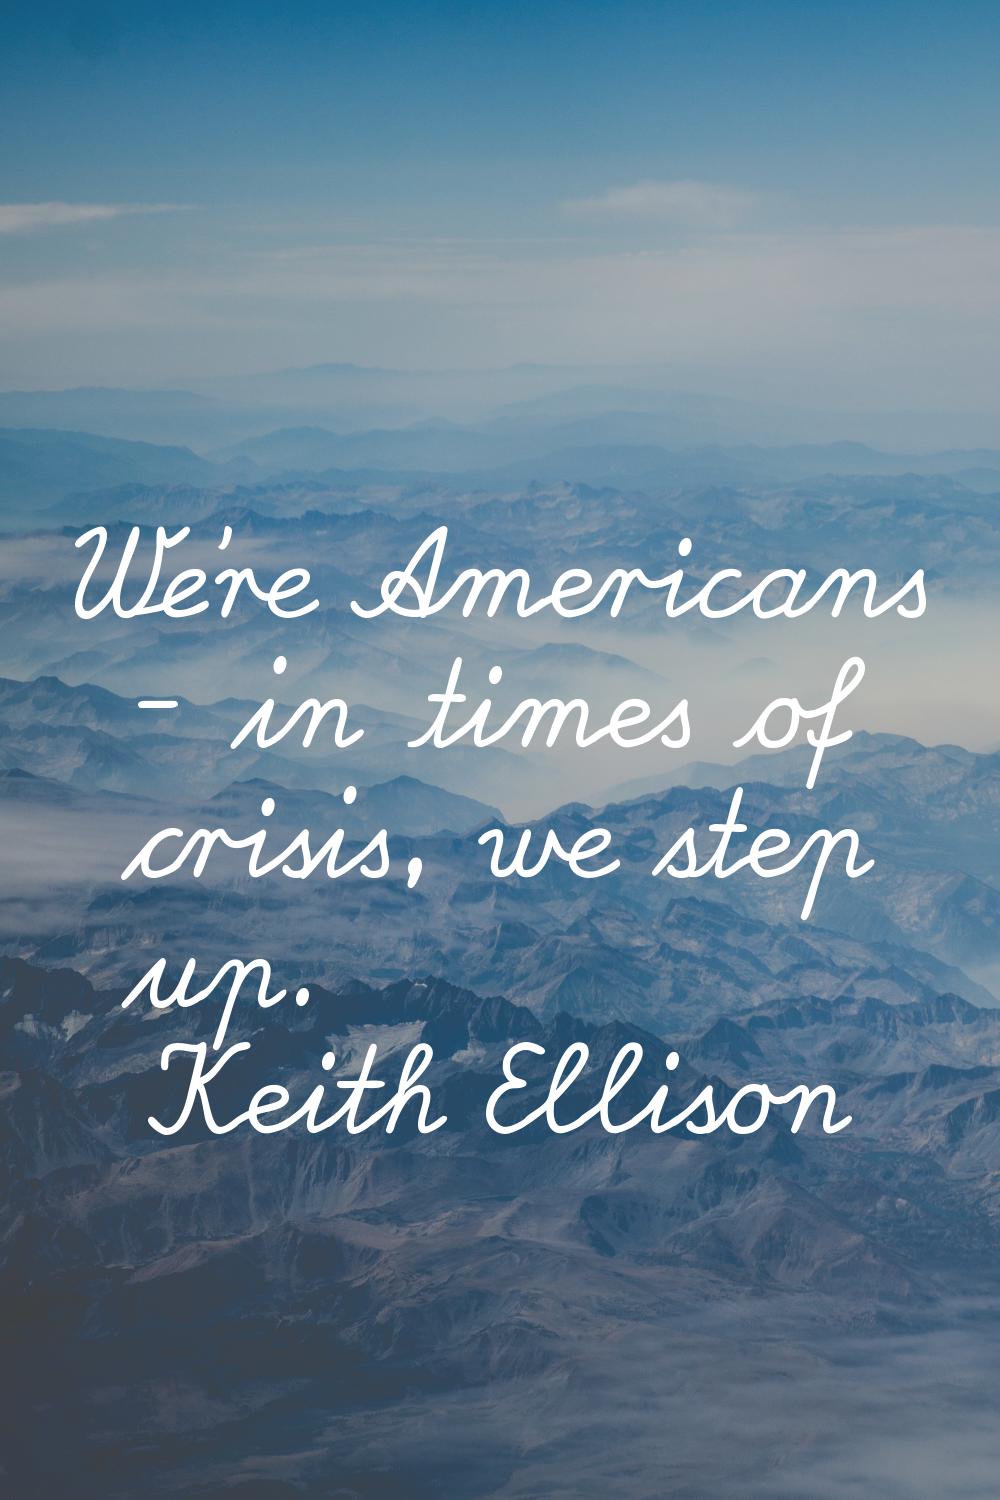 We're Americans - in times of crisis, we step up.